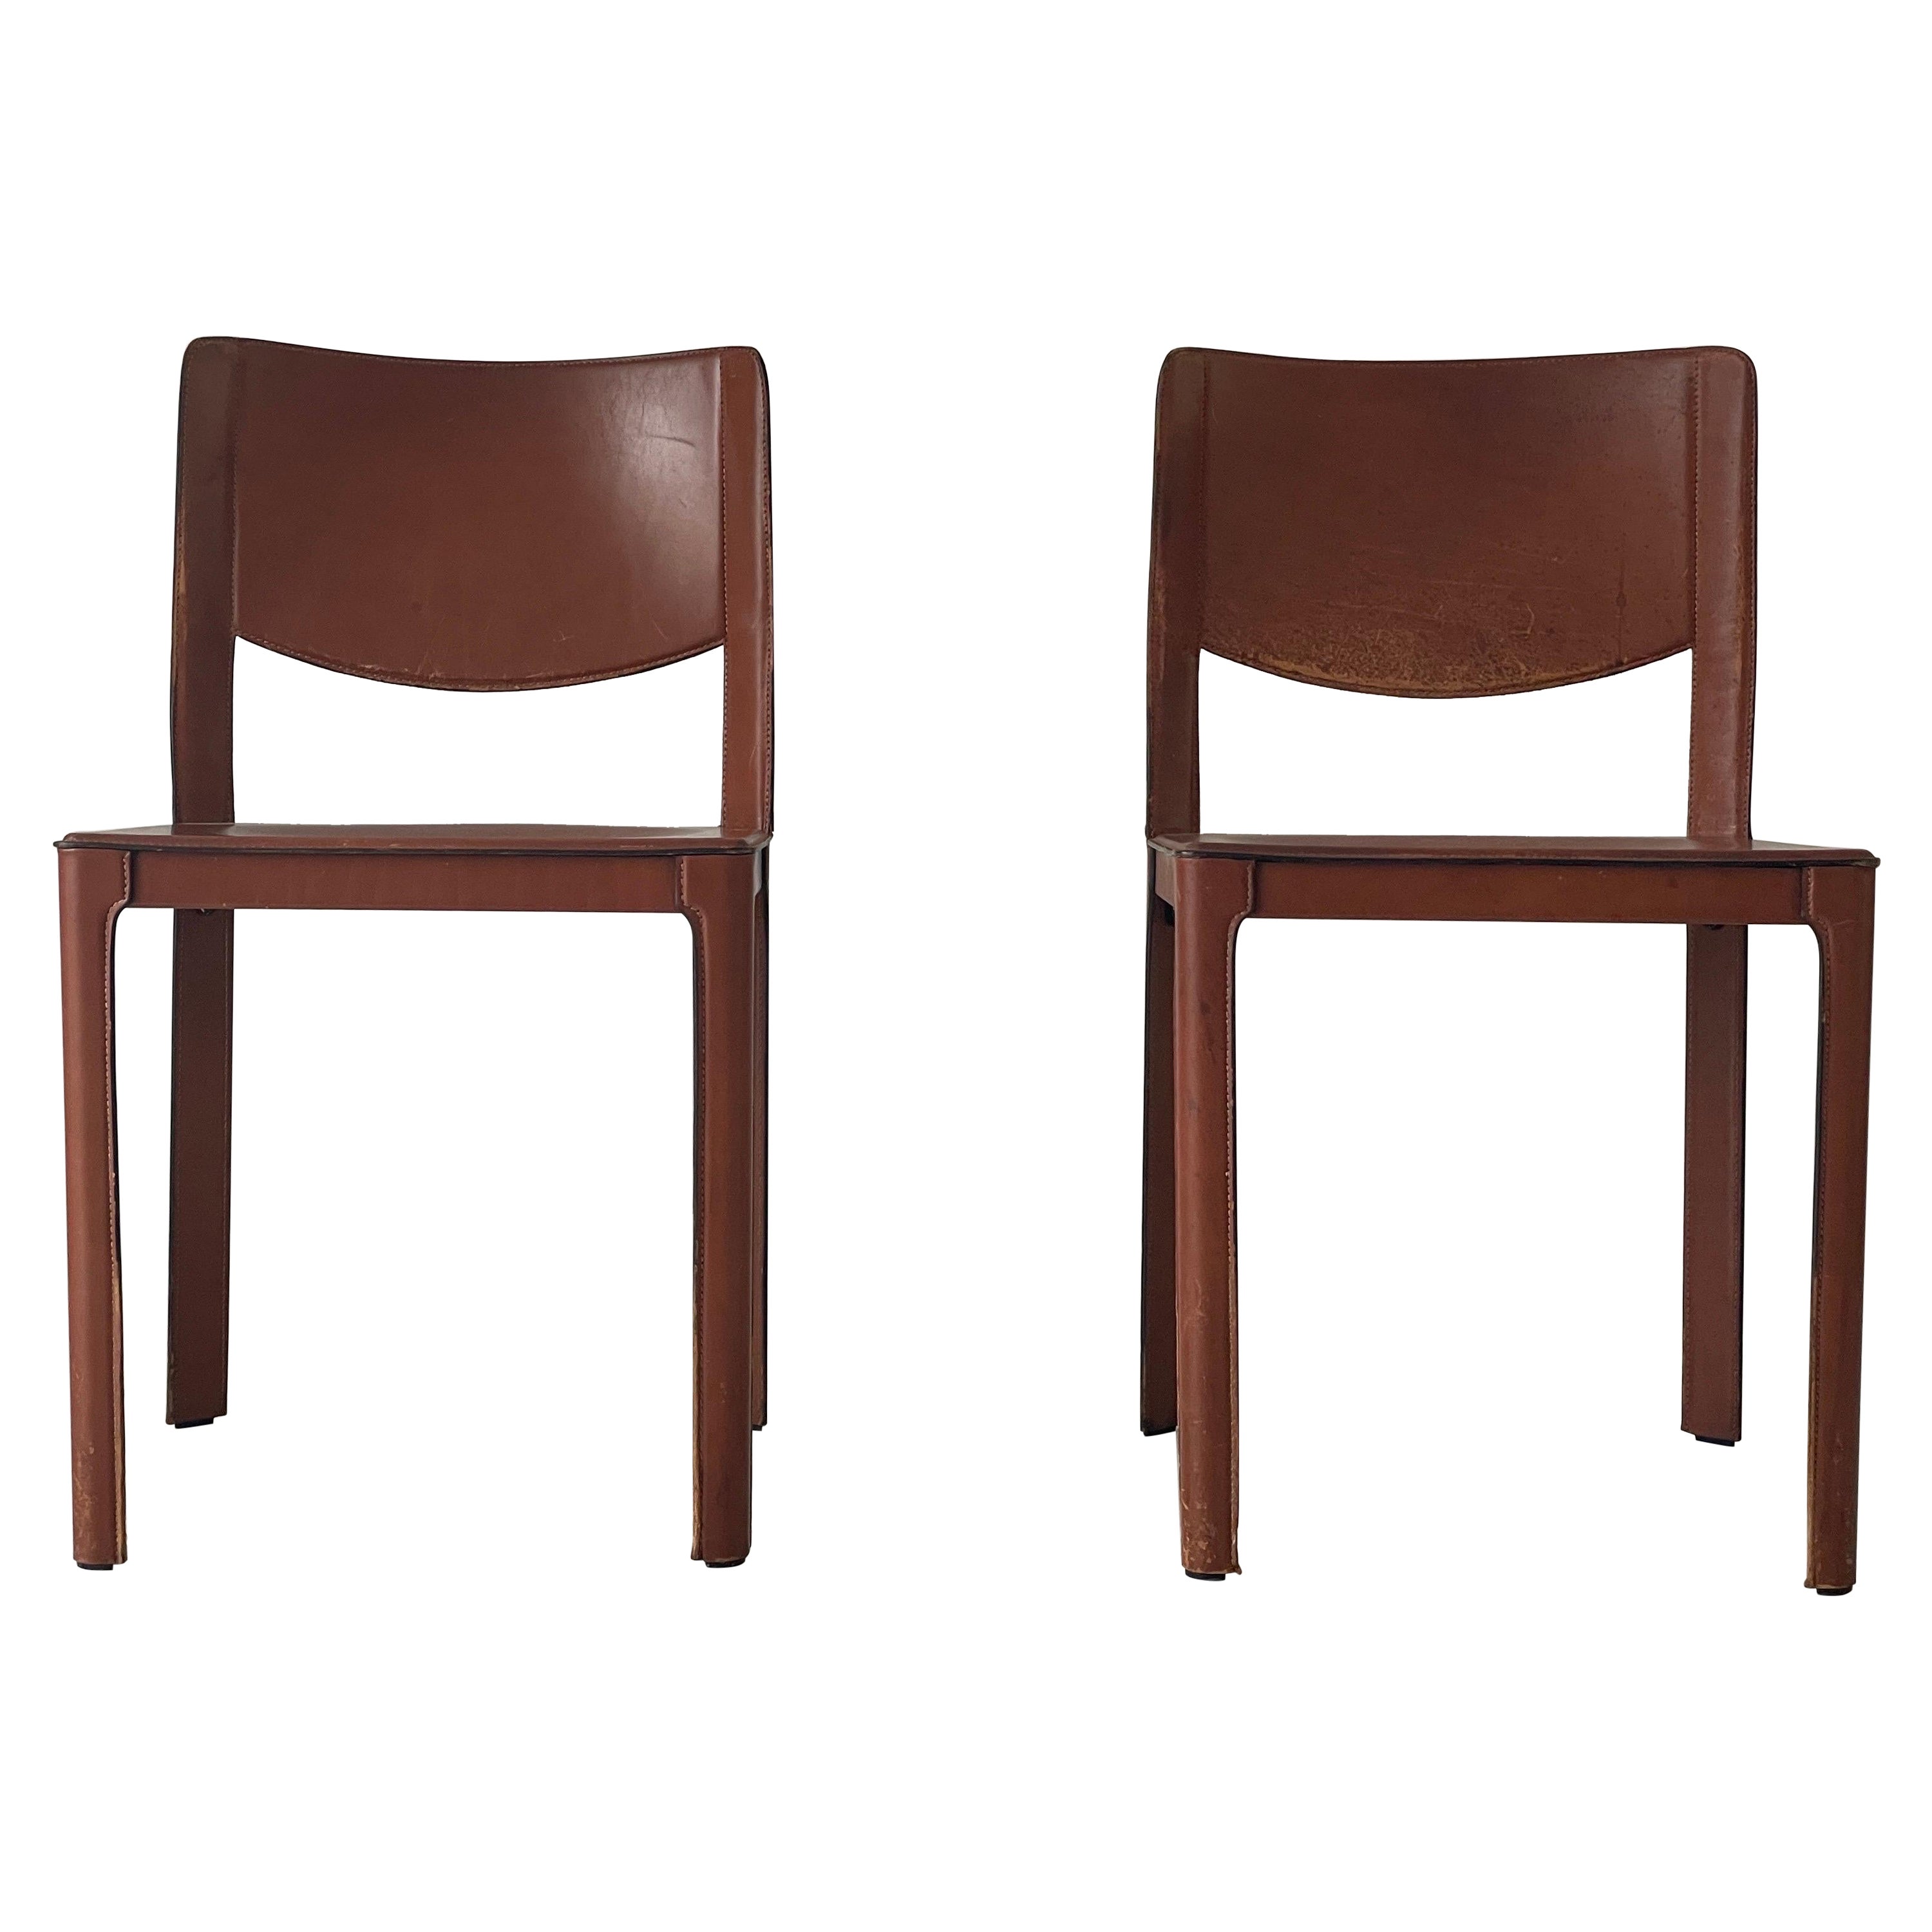 Pair of Italian Brown Leather Chairs by Matteo Grassi, 1970s, Italy